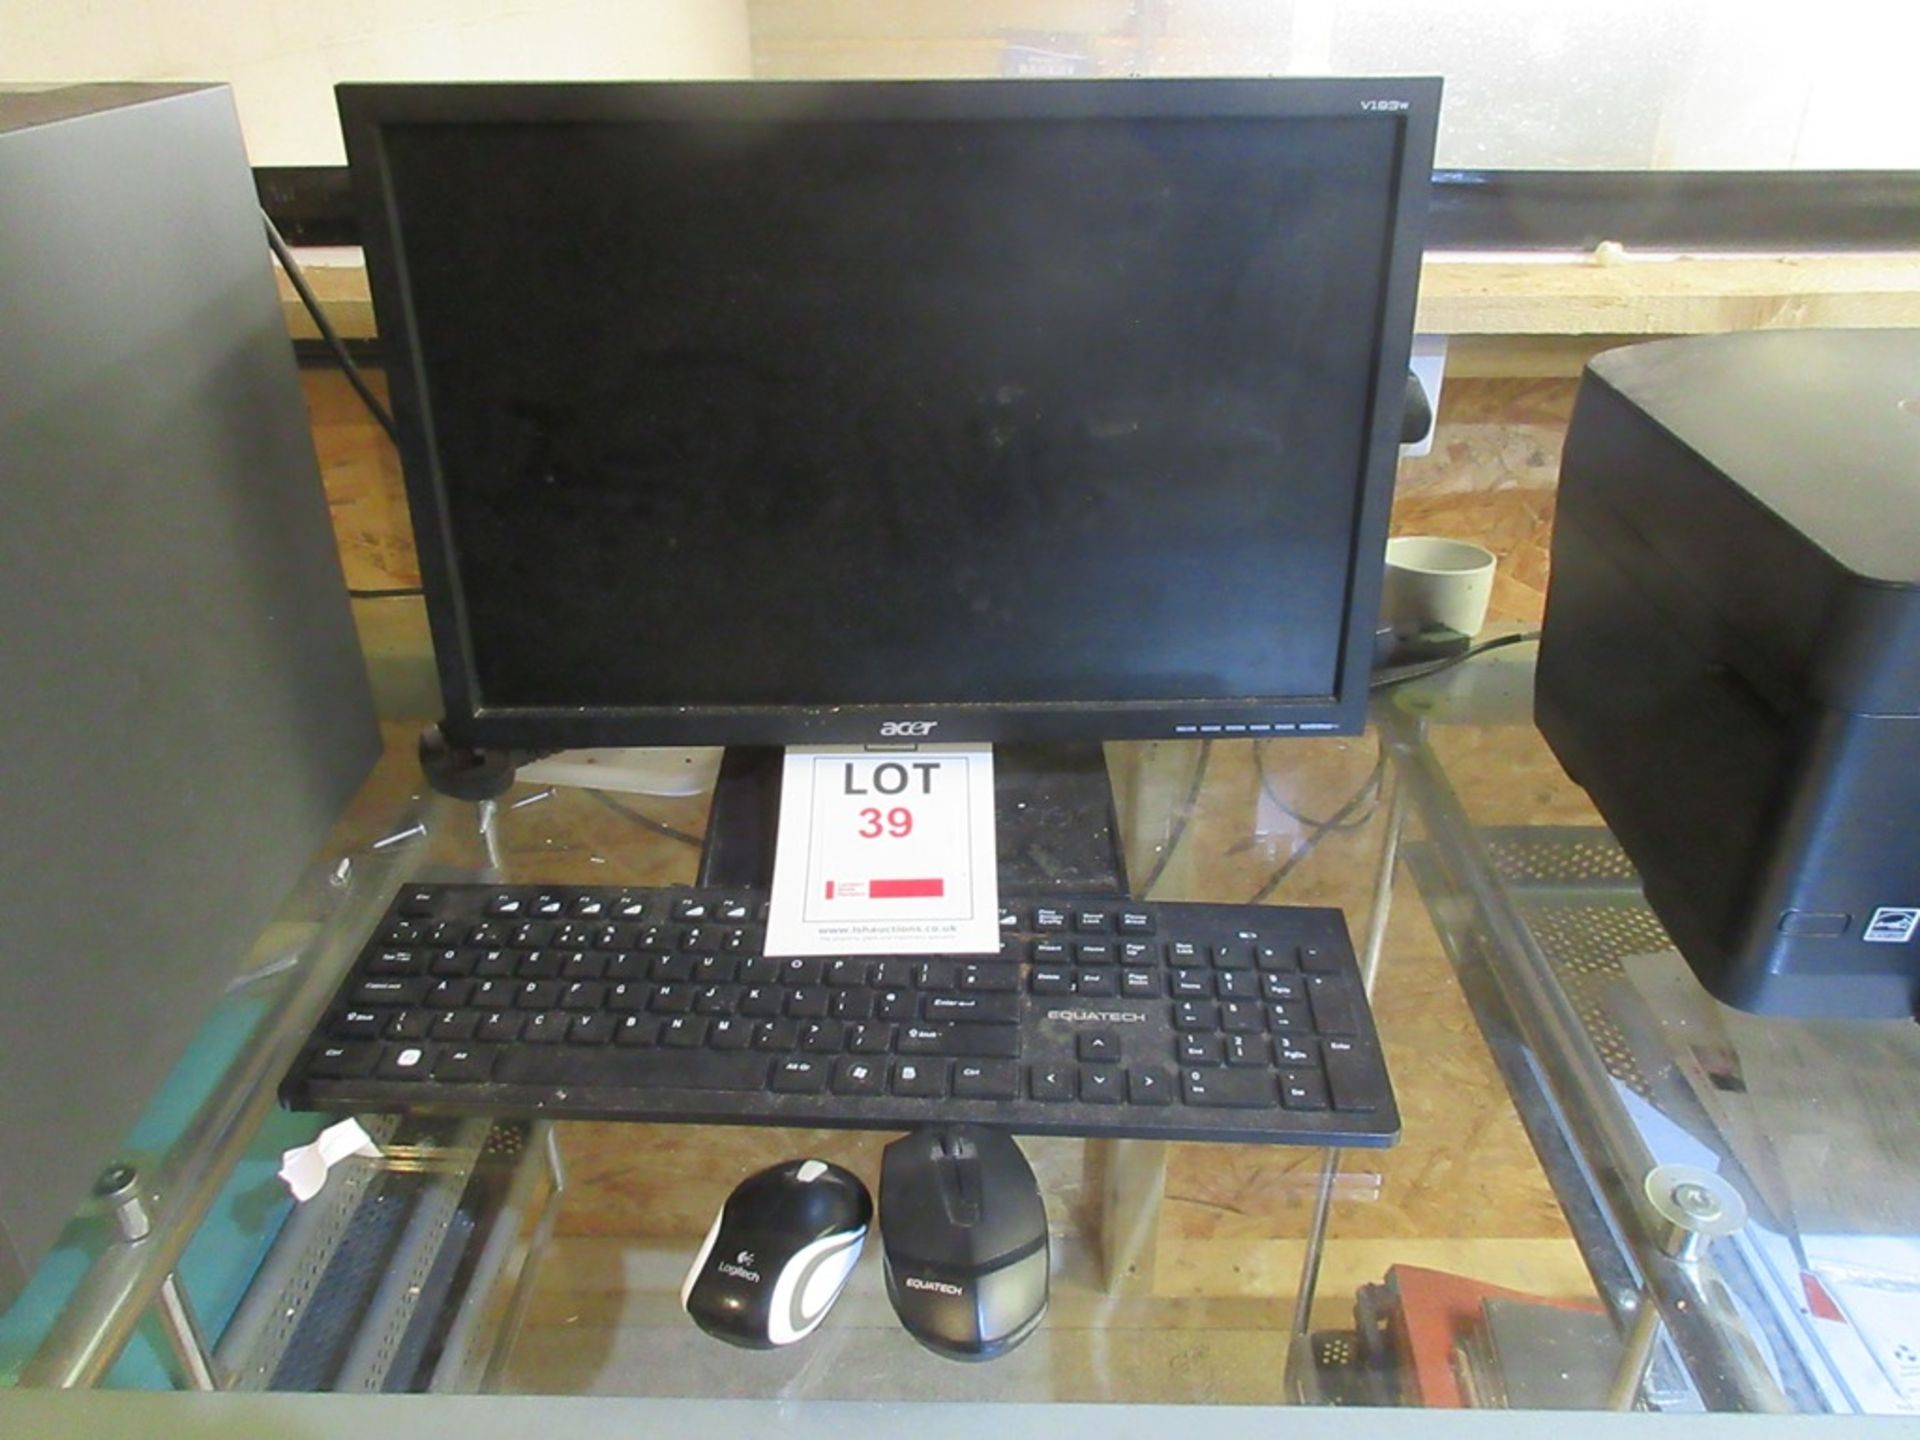 Fujitsu Corei3 computer system with Acer flat screen monitor, keyboard, mouse and HP Officejet - Image 4 of 7